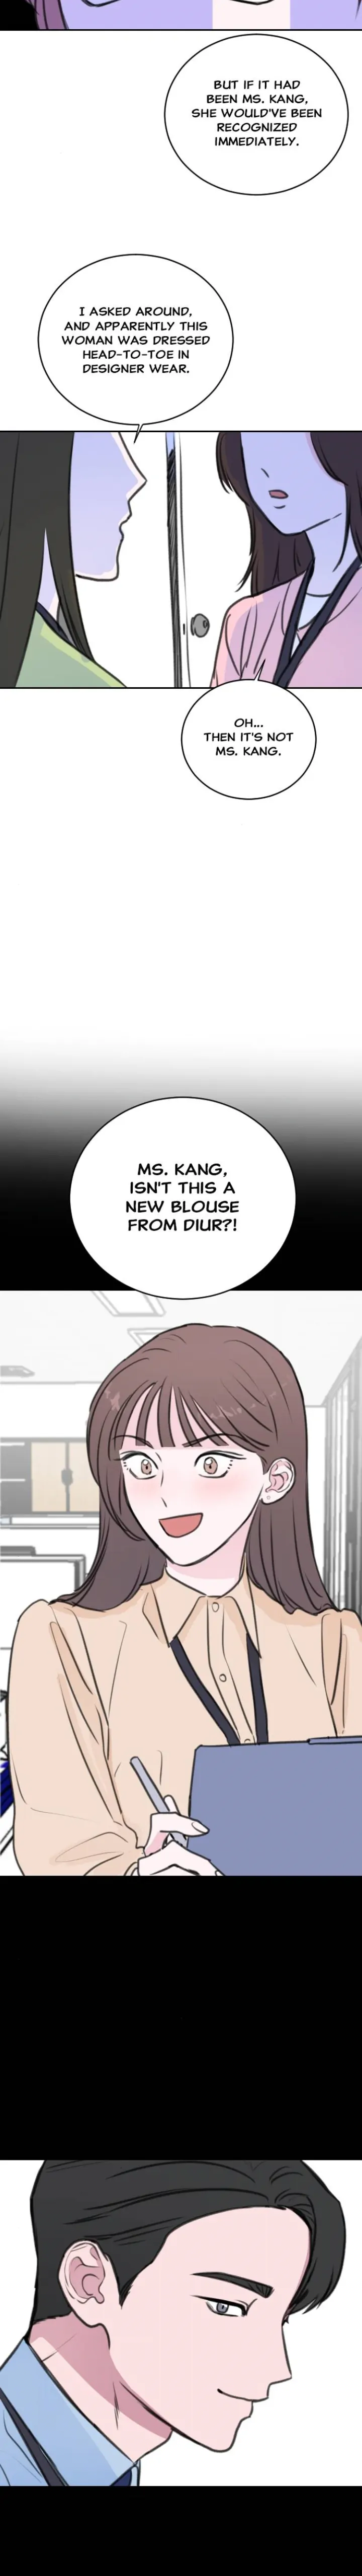 Office Marriage, After a Breakup chapter 16